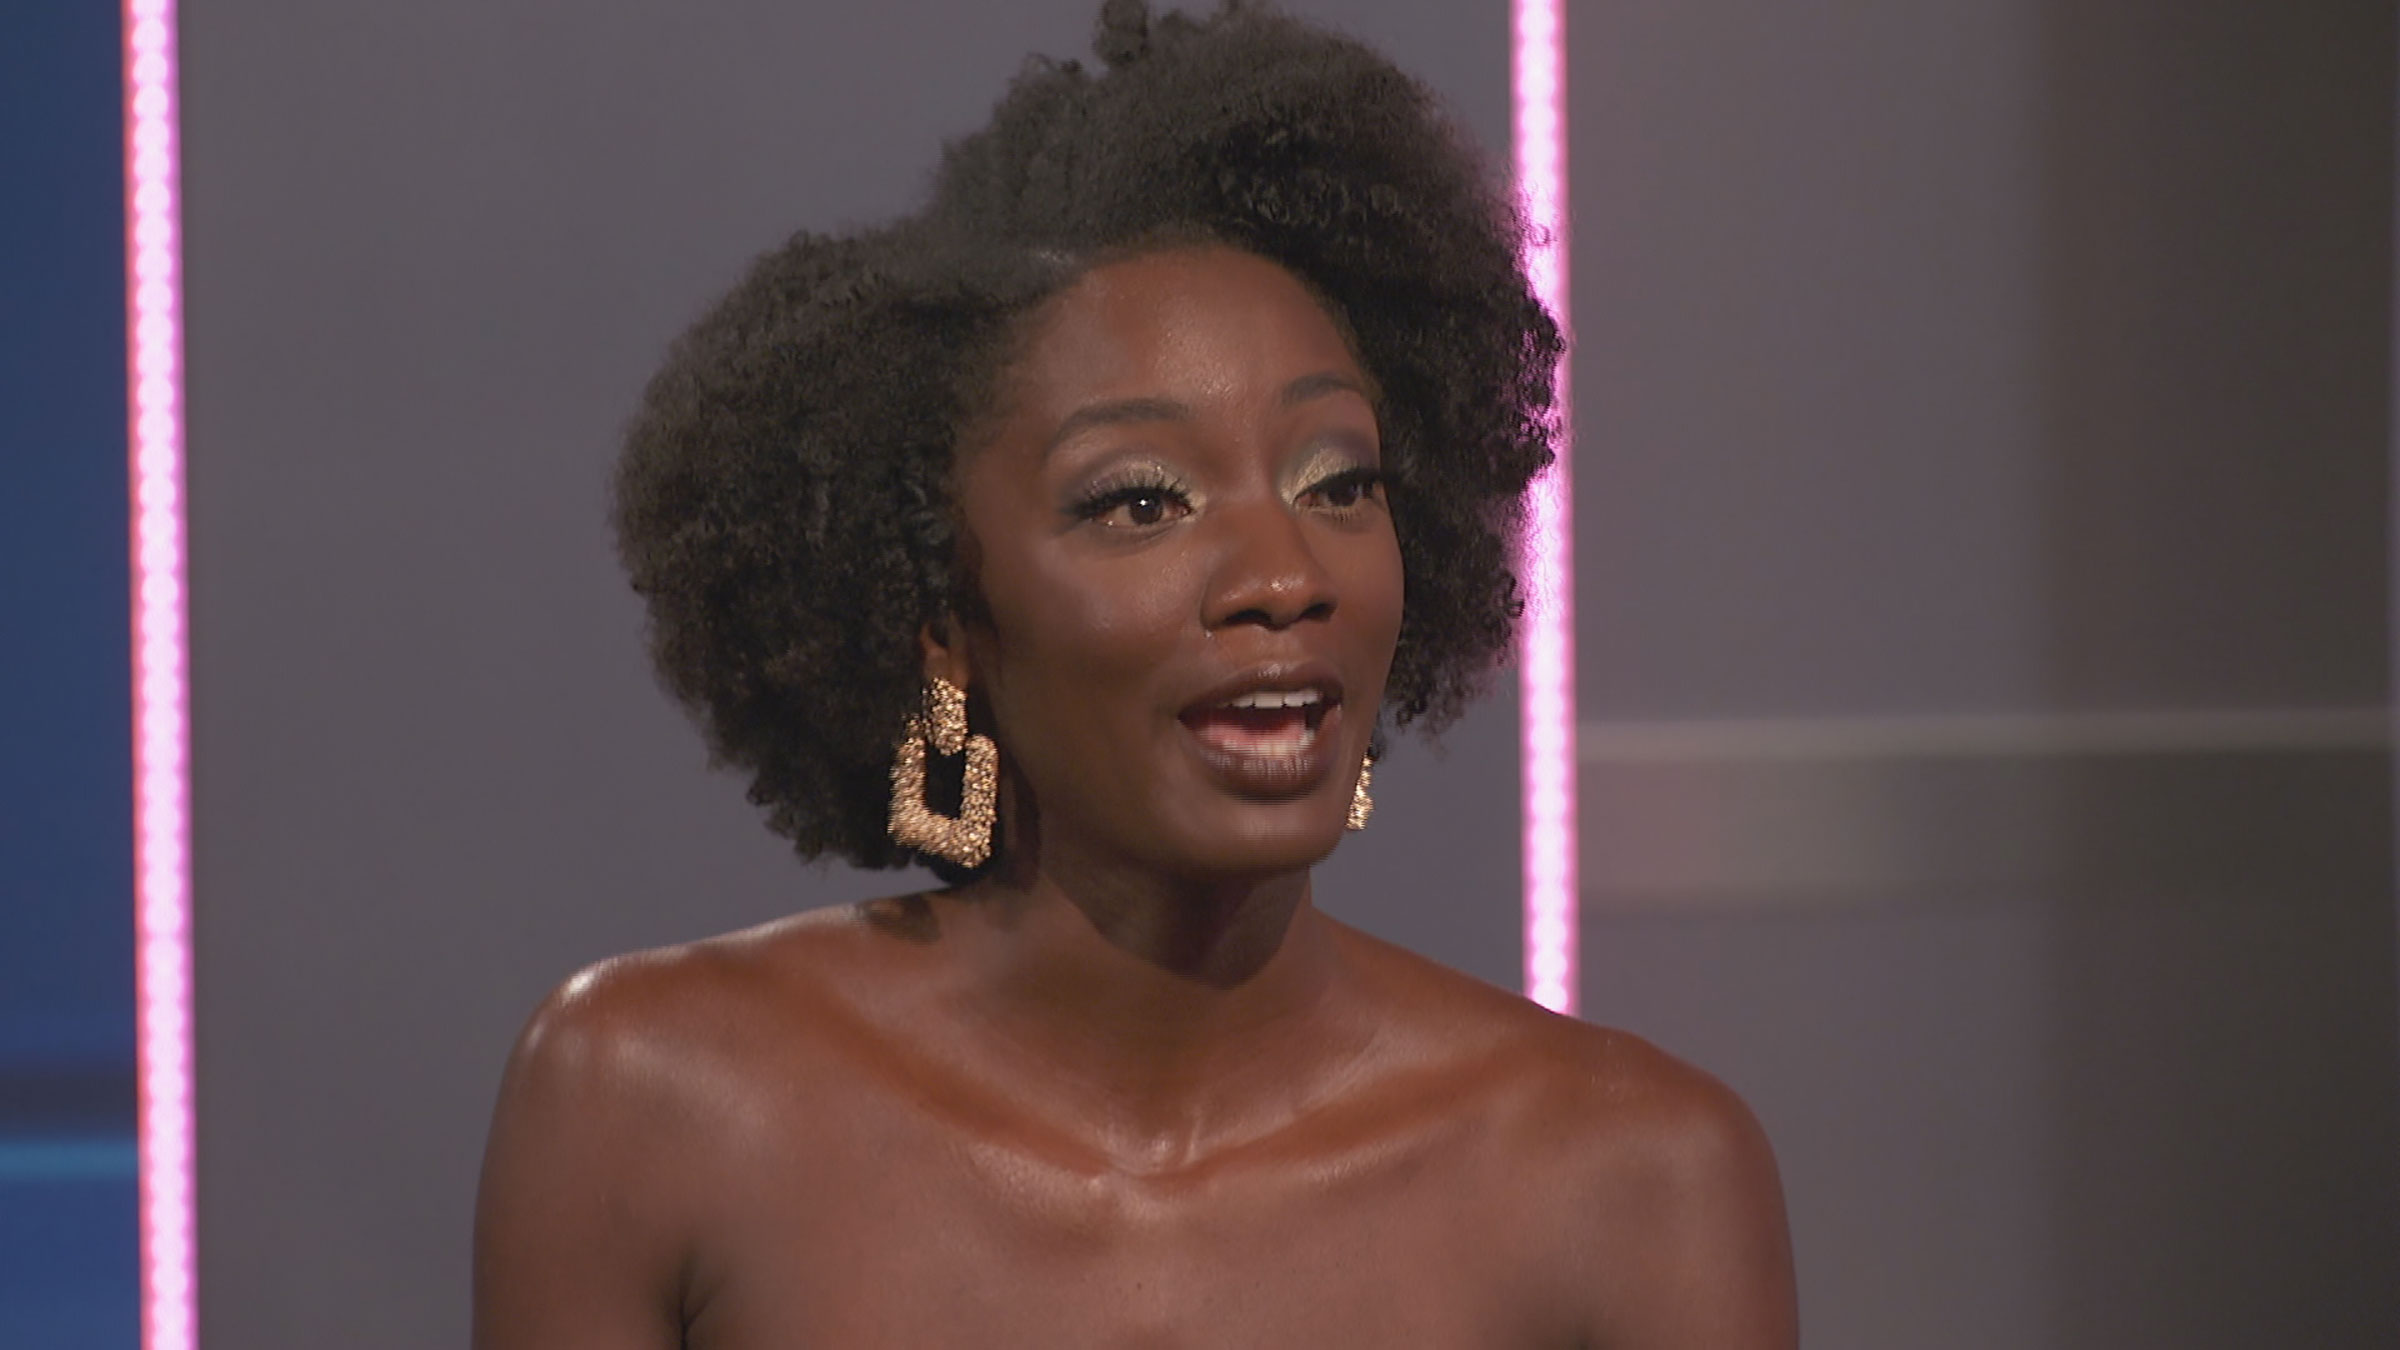 Azah Awasum on the finale of Big Brother on Sept 29, 2021.